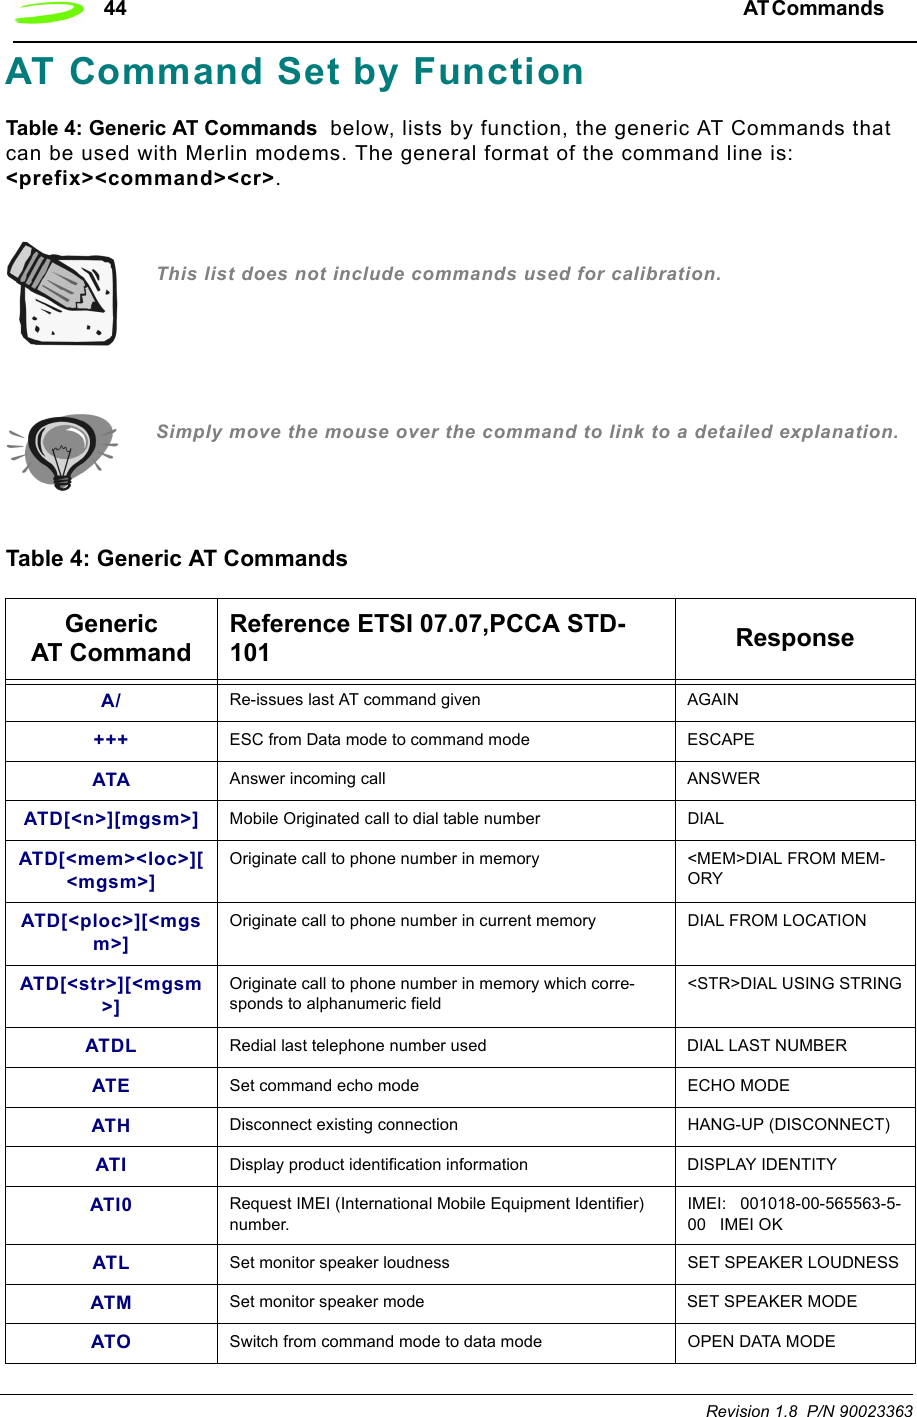 44 AT Commands  Revision 1.8  P/N 90023363AT Command Set by FunctionTable 4: Generic AT Commands  below, lists by function, the generic AT Commands that can be used with Merlin modems. The general format of the command line is: &lt;prefix&gt;&lt;command&gt;&lt;cr&gt;. This list does not include commands used for calibration.Simply move the mouse over the command to link to a detailed explanation.Table 4: Generic AT CommandsGeneric AT Command Reference ETSI 07.07,PCCA STD-101 ResponseA/ Re-issues last AT command given AGAIN+++ ESC from Data mode to command mode ESCAPEATA Answer incoming call ANSWERATD[&lt;n&gt;][mgsm&gt;] Mobile Originated call to dial table number DIALATD[&lt;mem&gt;&lt;loc&gt;][&lt;mgsm&gt;]Originate call to phone number in memory  &lt;MEM&gt;DIAL FROM MEM-ORYATD[&lt;ploc&gt;][&lt;mgsm&gt;]Originate call to phone number in current memory DIAL FROM LOCATIONATD[&lt;str&gt;][&lt;mgsm&gt;]Originate call to phone number in memory which corre-sponds to alphanumeric field &lt;STR&gt;DIAL USING STRINGATDL Redial last telephone number used DIAL LAST NUMBERATE Set command echo mode ECHO MODEATH Disconnect existing connection HANG-UP (DISCONNECT)ATI Display product identification information DISPLAY IDENTITYATI0 Request IMEI (International Mobile Equipment Identifier) number.IMEI:   001018-00-565563-5-00   IMEI OKATL Set monitor speaker loudness SET SPEAKER LOUDNESSATM Set monitor speaker mode SET SPEAKER MODEATO Switch from command mode to data mode OPEN DATA MODE